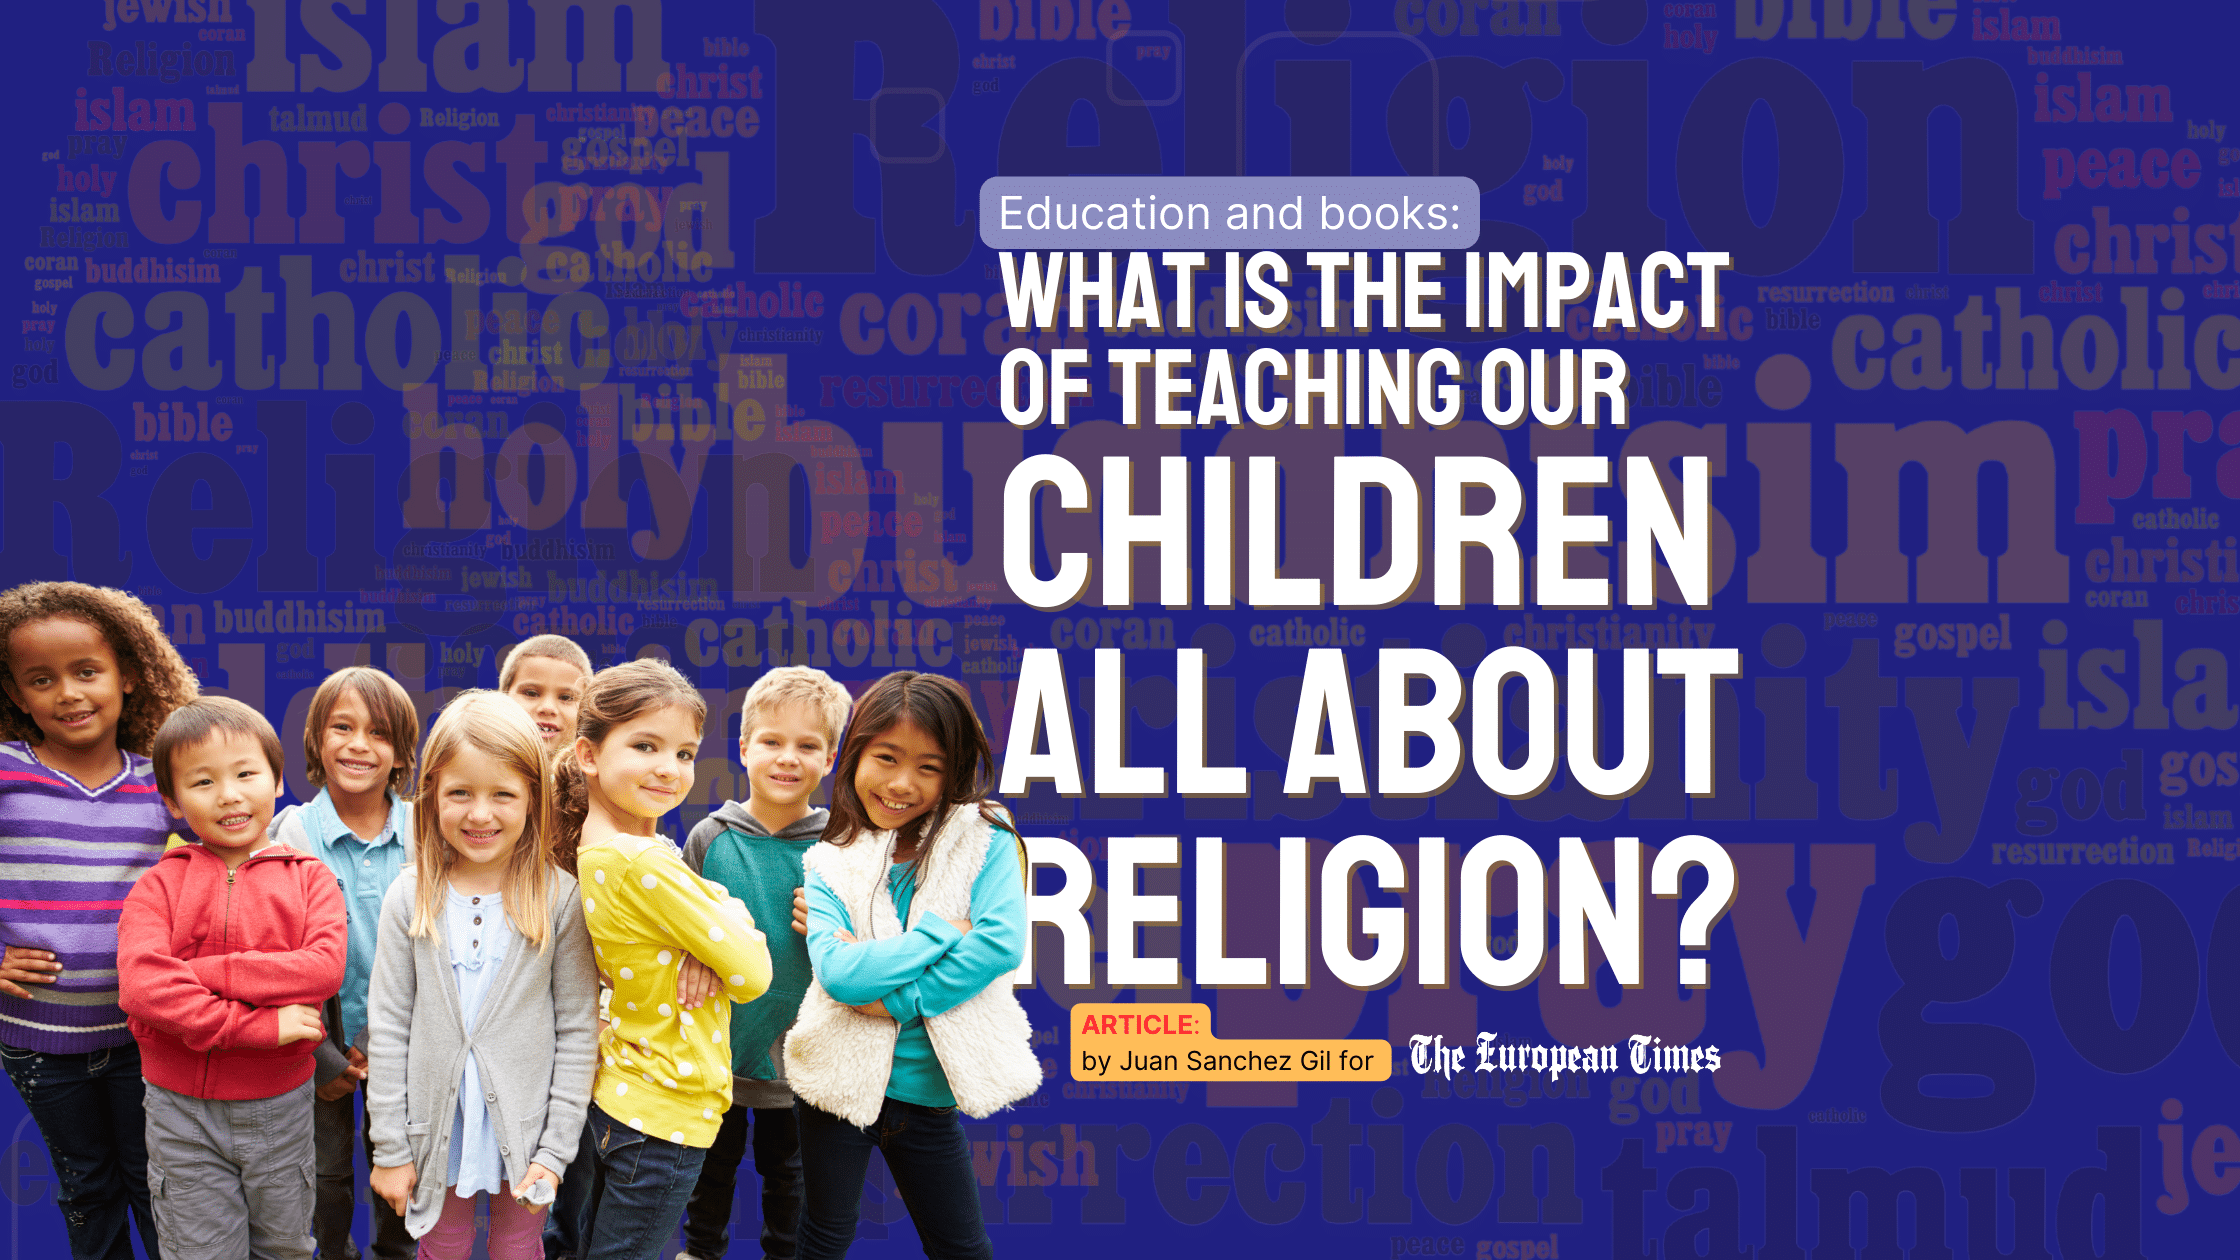 What is the Impact of Teaching our Children All About Religion?